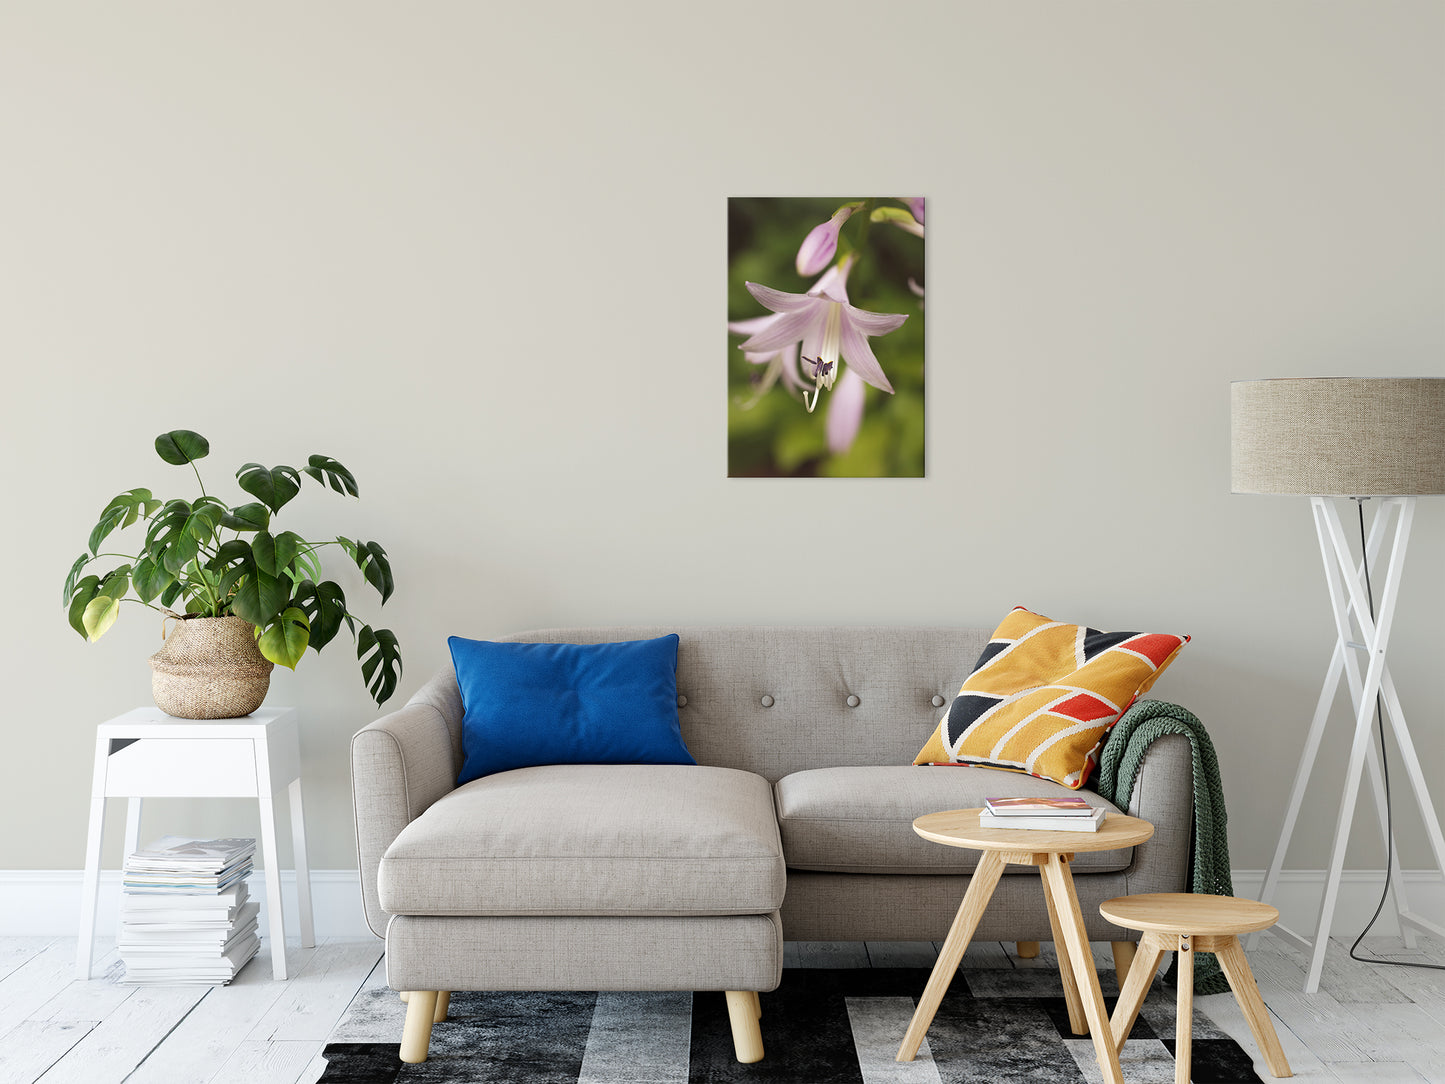 Softened Hosta Bloom Nature / Floral Photo Fine Art Canvas Wall Art Prints 20" x 24" - PIPAFINEART